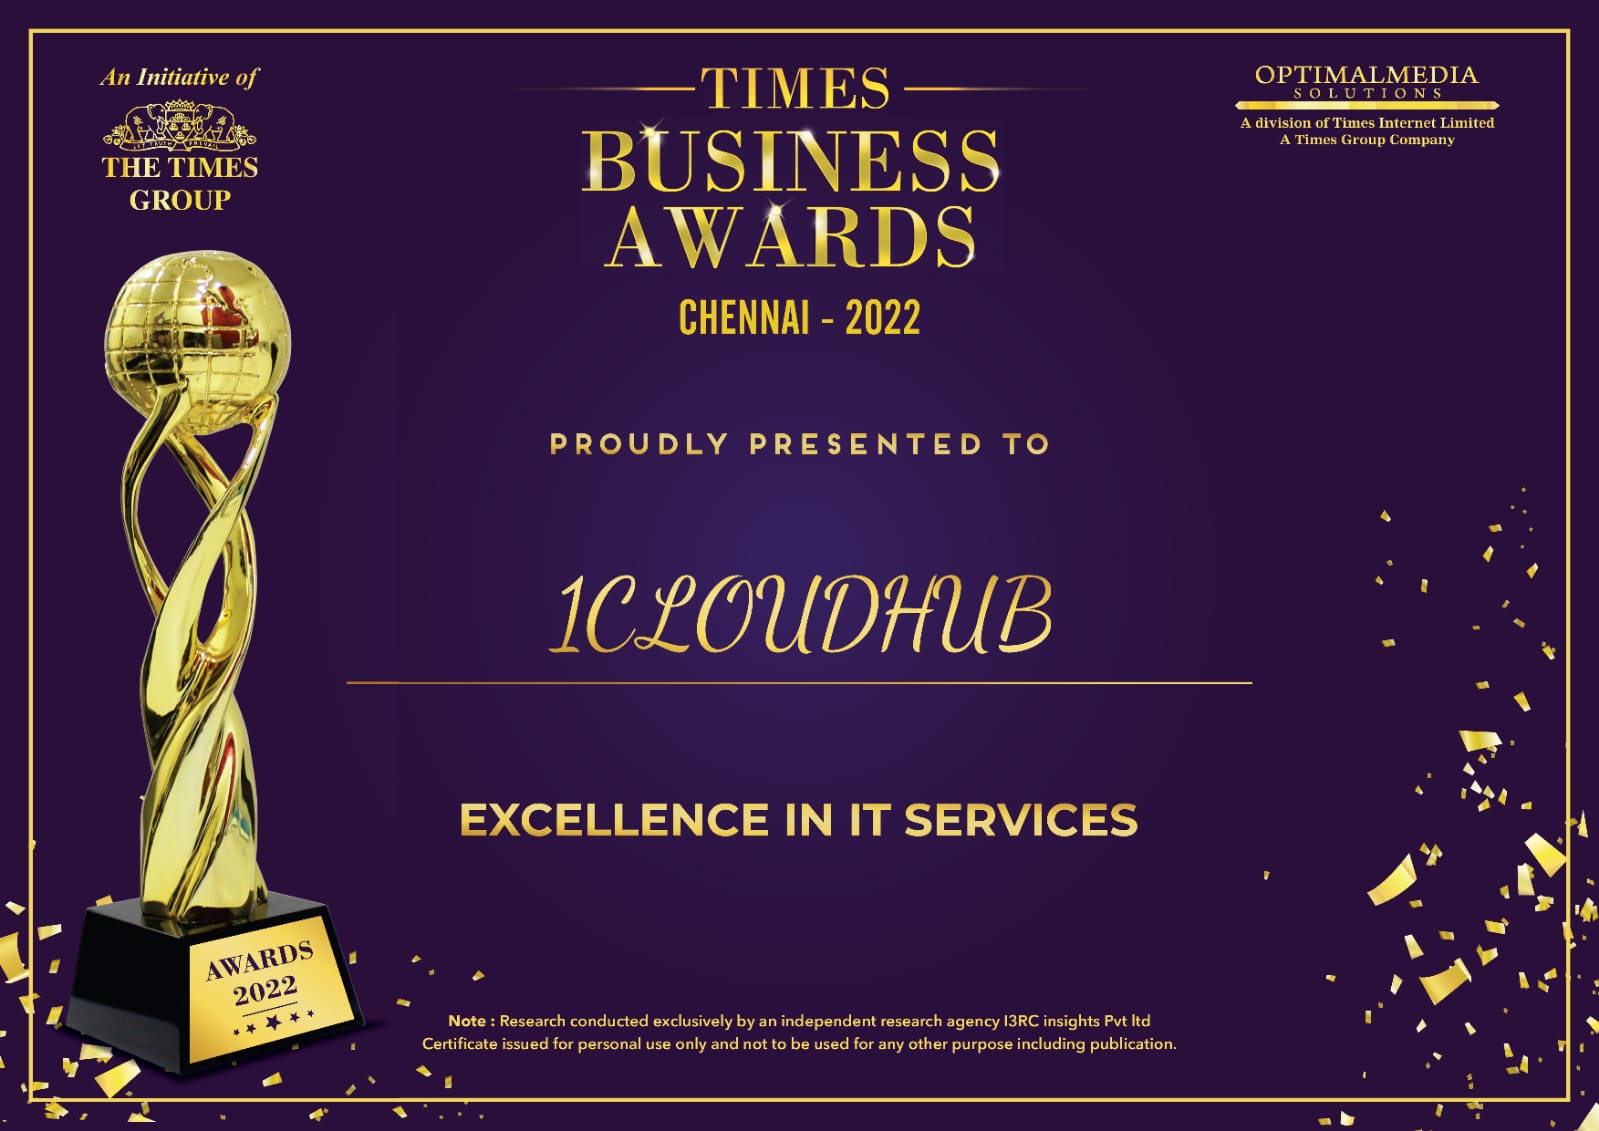 1CloudHub wins the Times Business Award for IT excellence